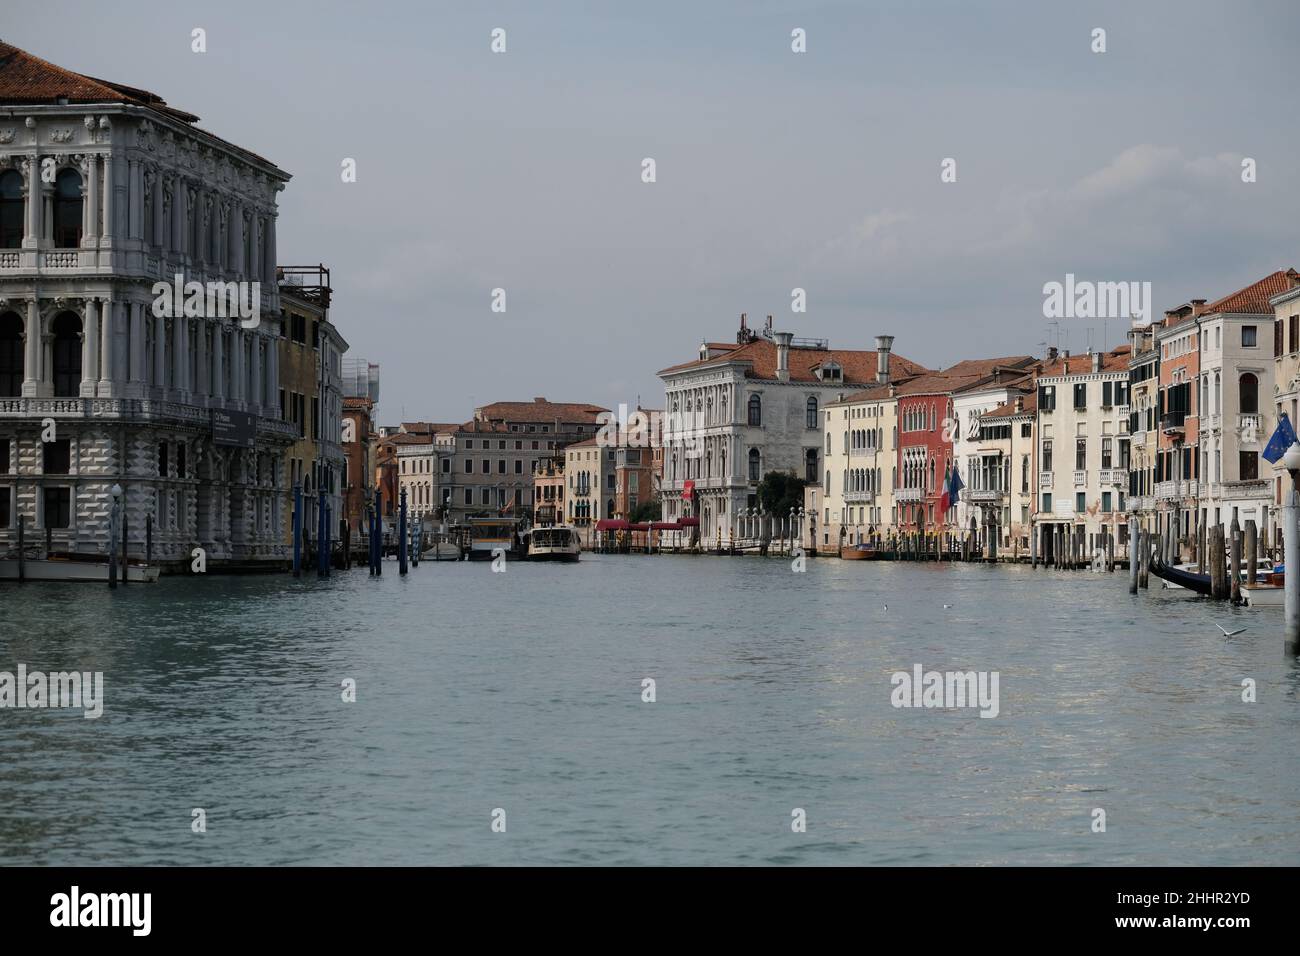 Views of Venice during the lockdown caused by coronavirus disease. Venice. Italy, March 20, 2020. Stock Photo